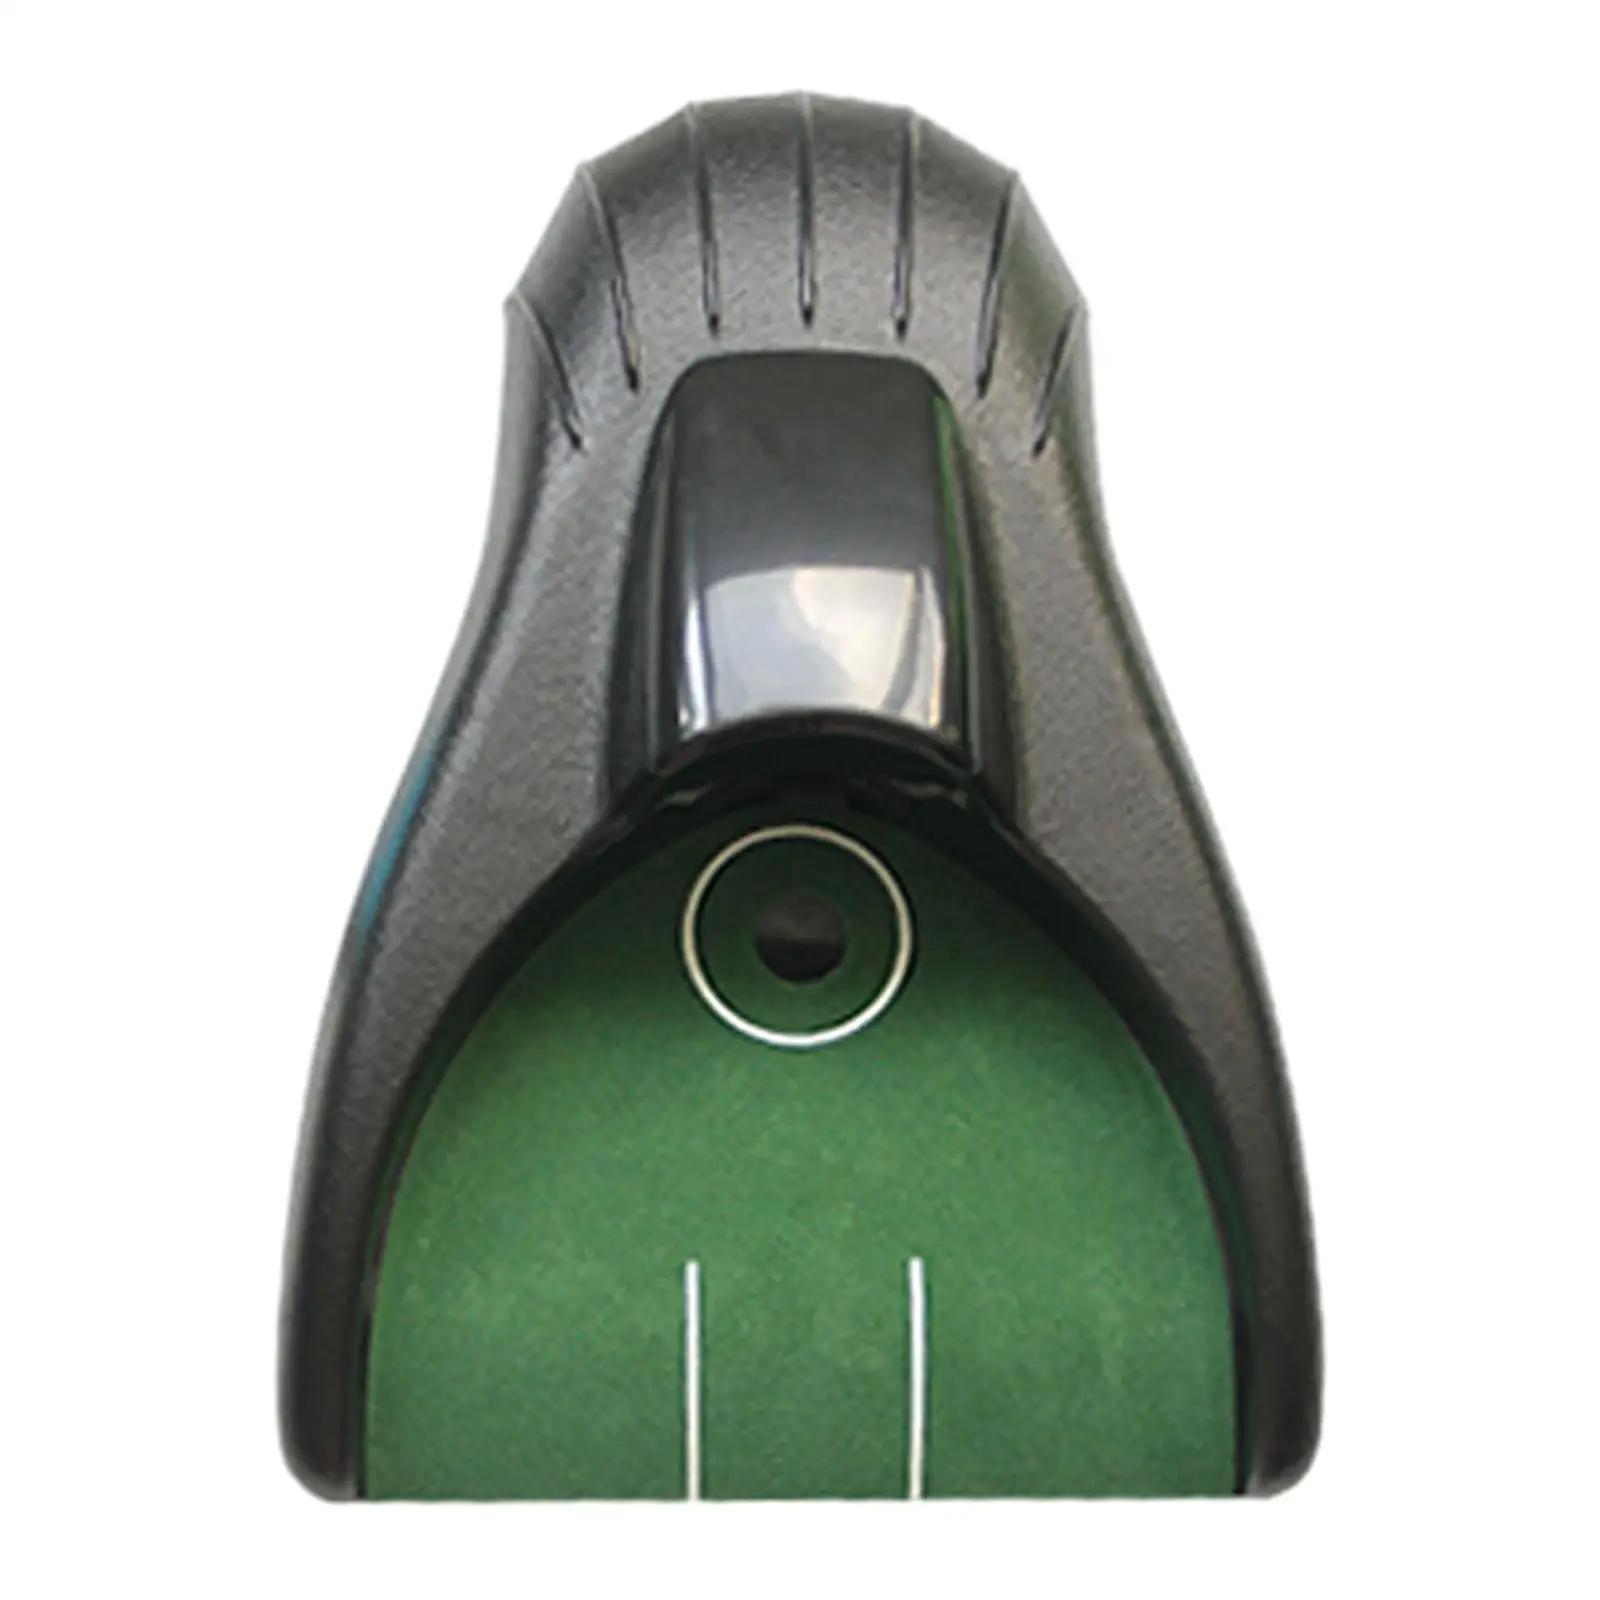 Golf Automatic Putting Cup Home Golf Accessories Training Cup Golf